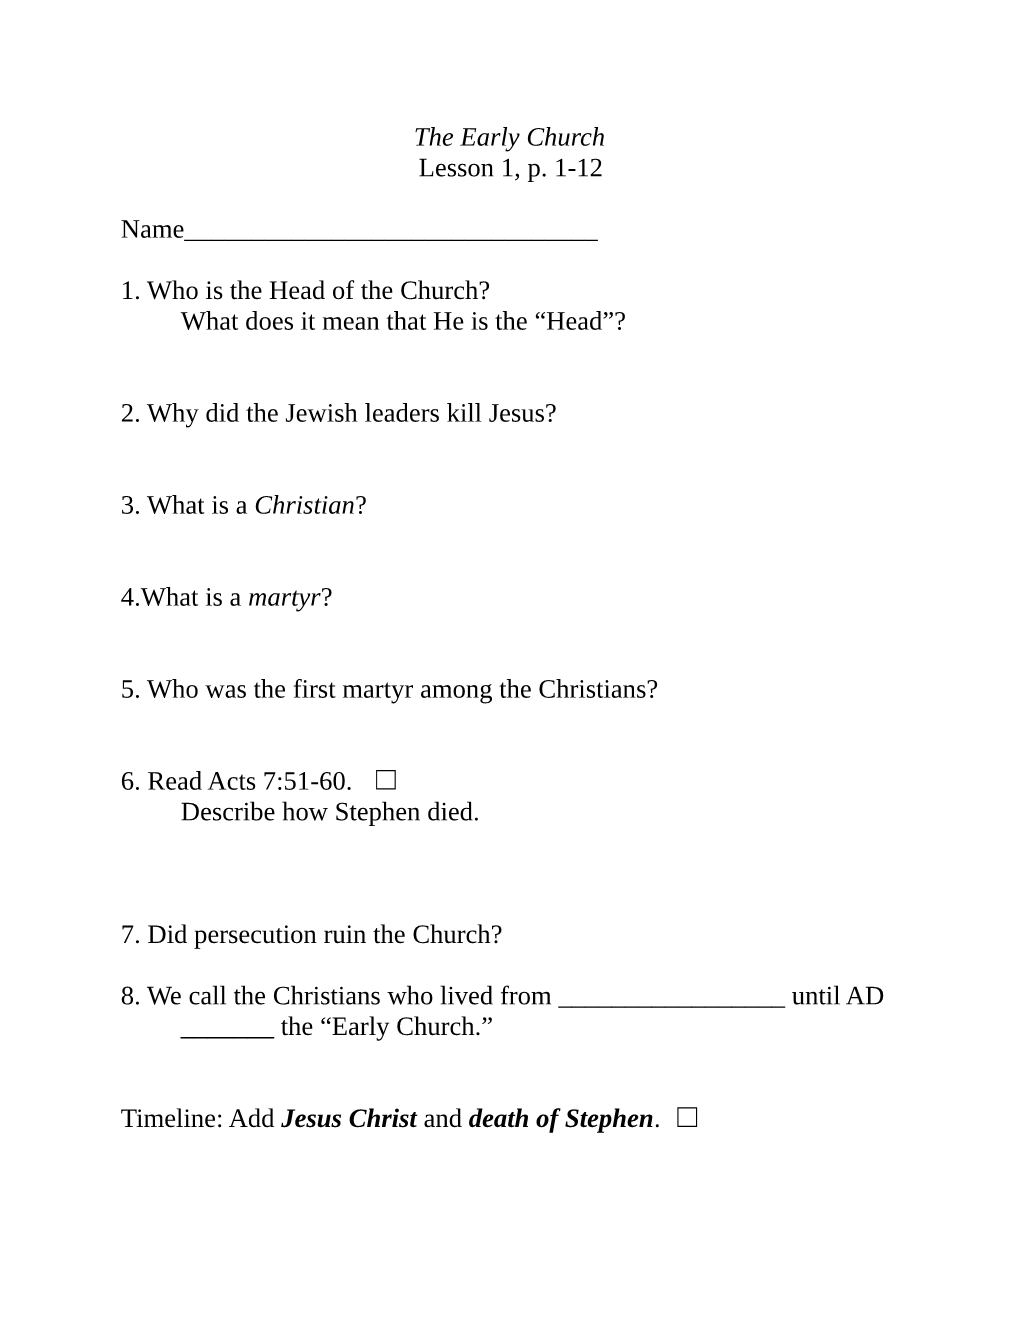 The Early Church Lesson 1, P. 1-12 Name___1. Who Is the Head of the Church?